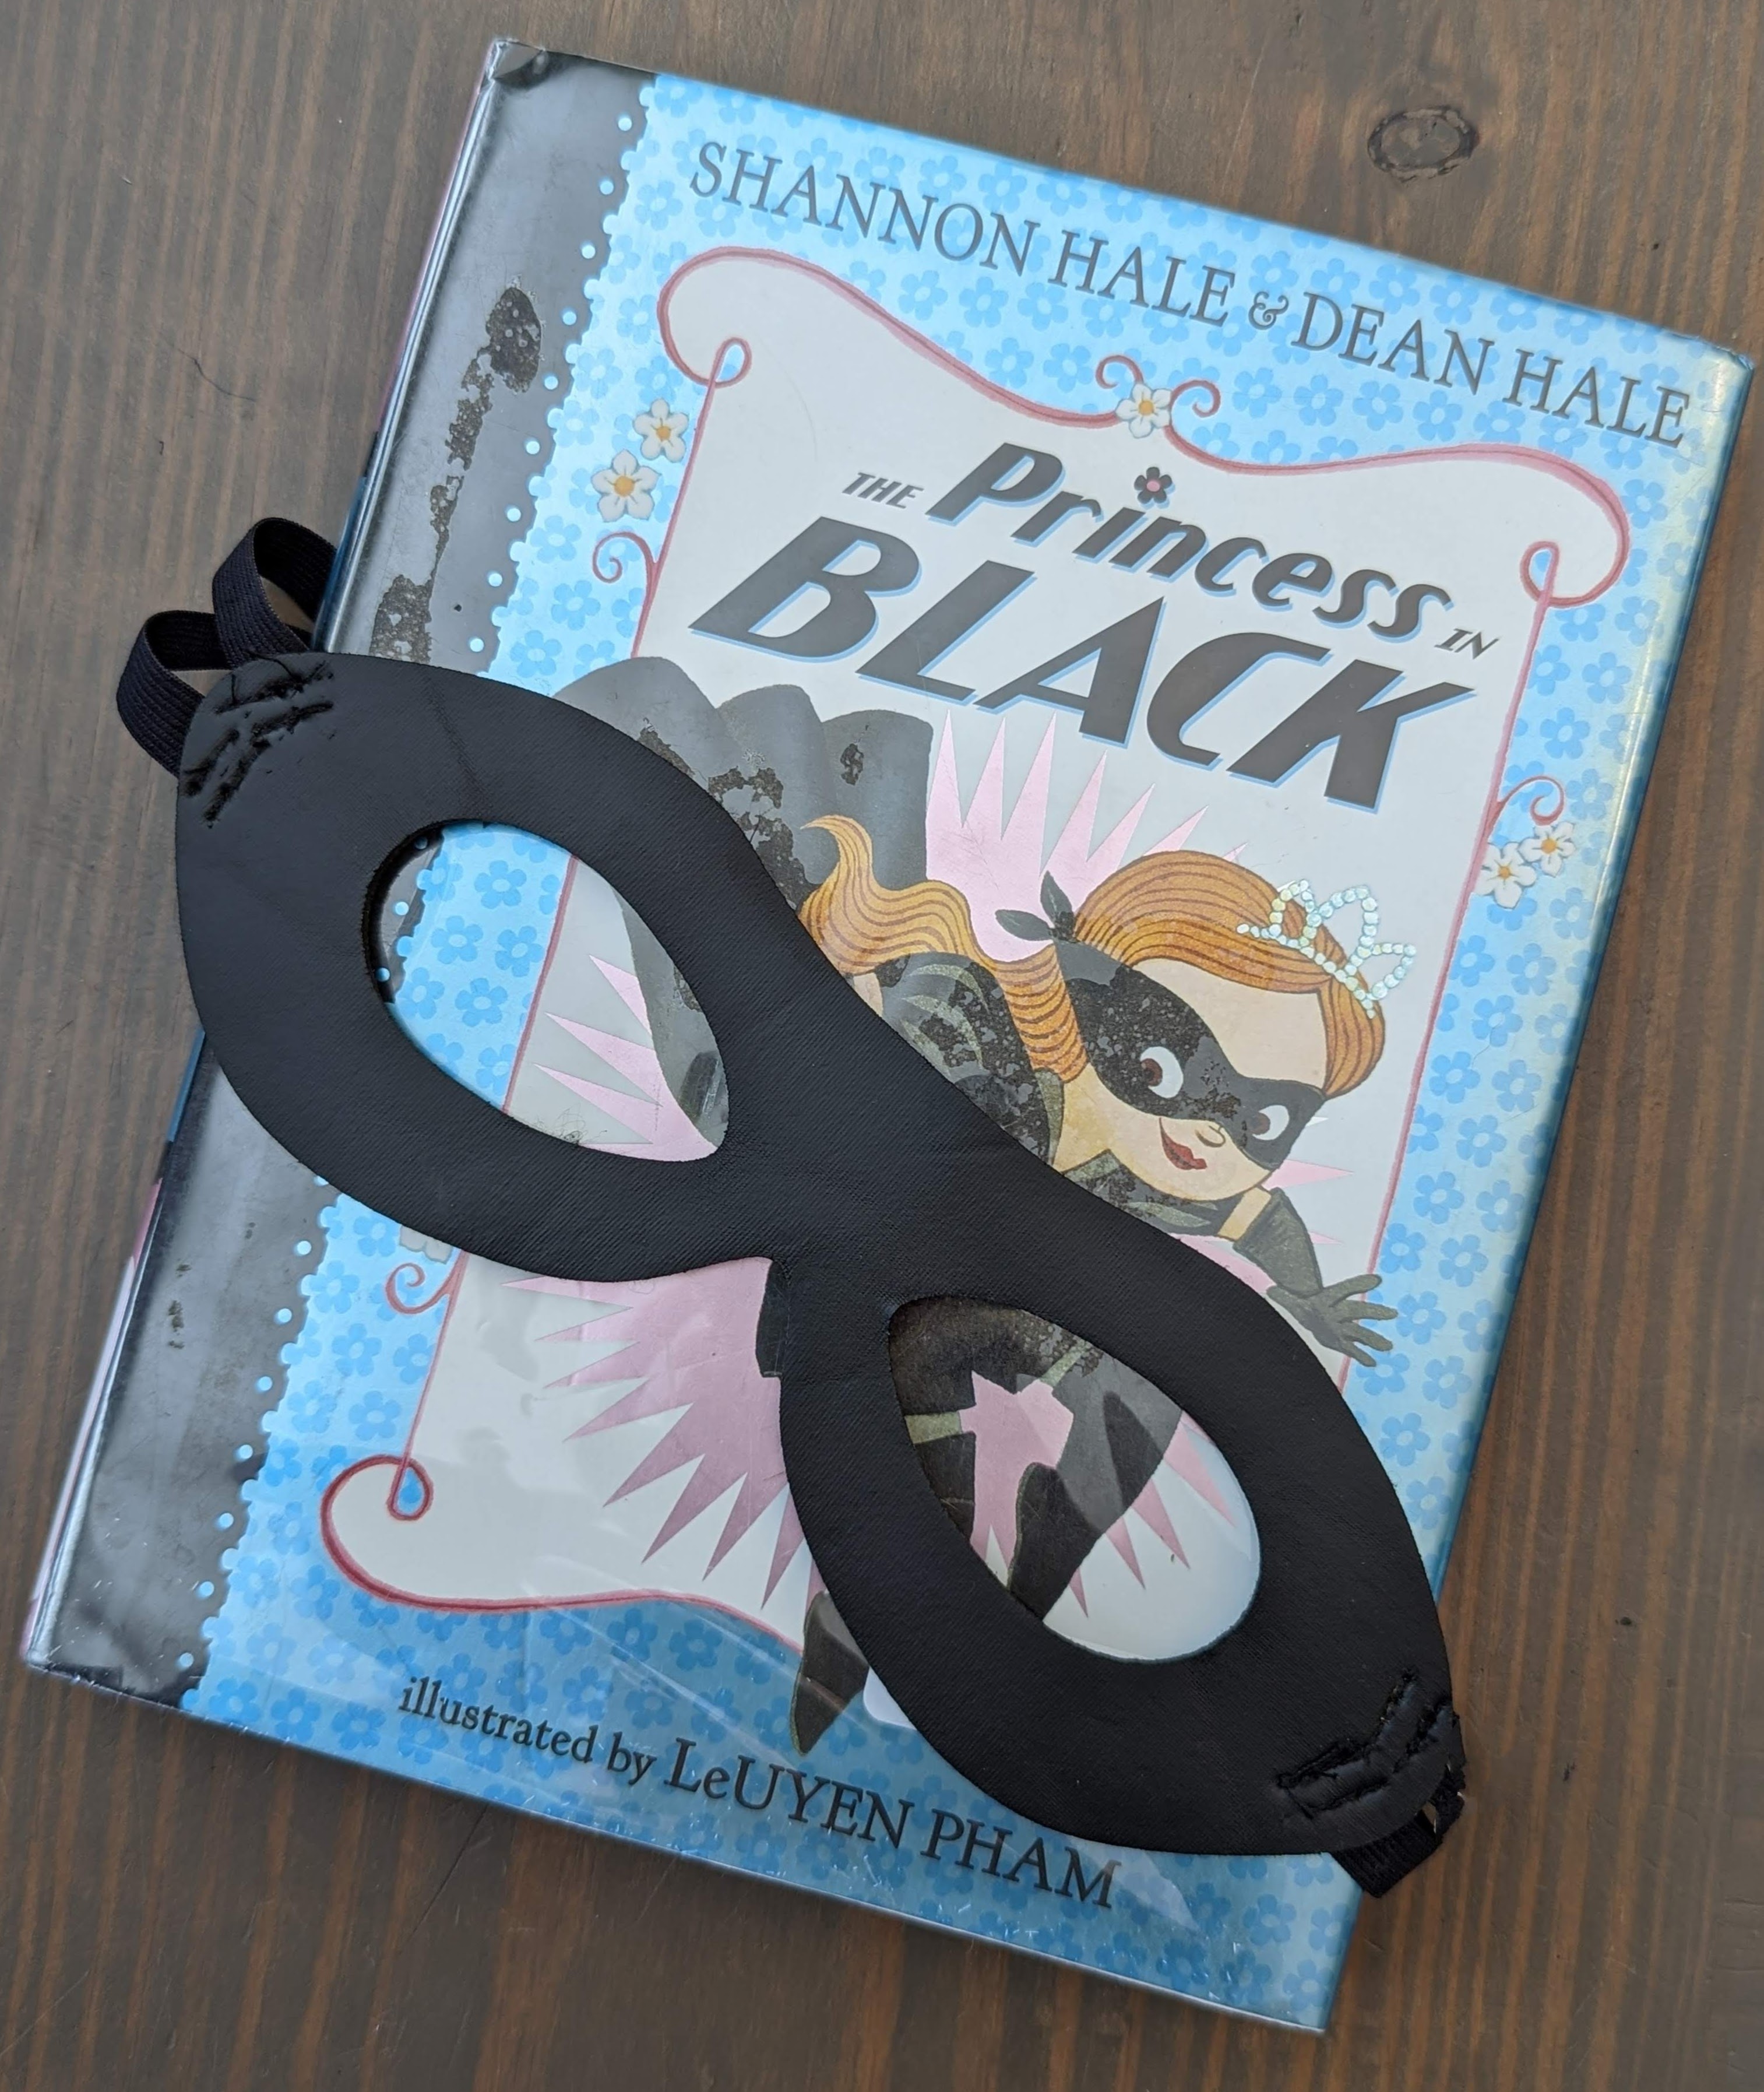 The Princess in Black by Shannon Hale and Dean Hale. A lovejoyreadalouds.com book review of the popular chapter book